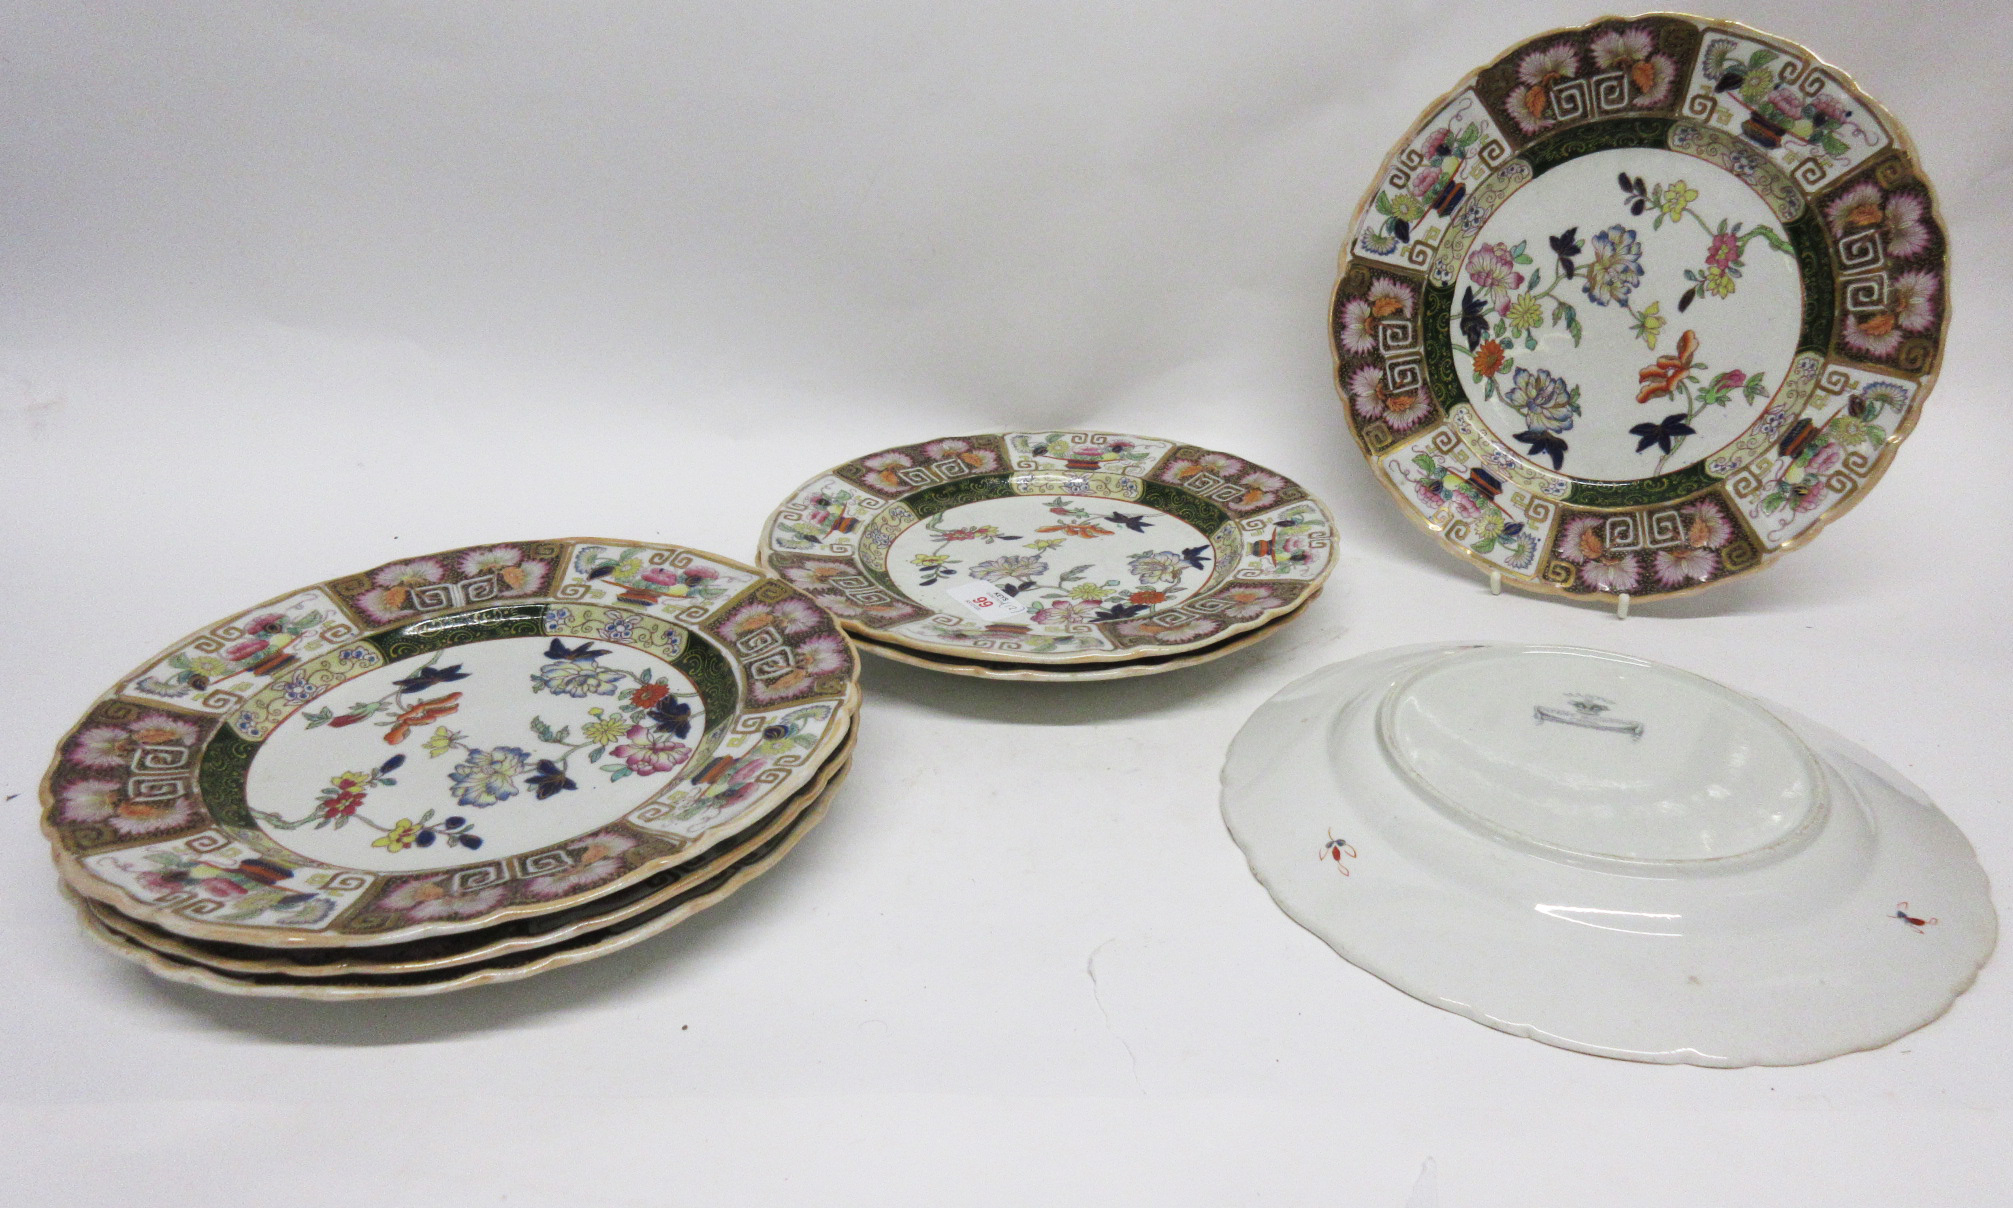 Set of Mason's Ironstone dinner plates, pattern 2842, comprising 12 dinner plates, all with a